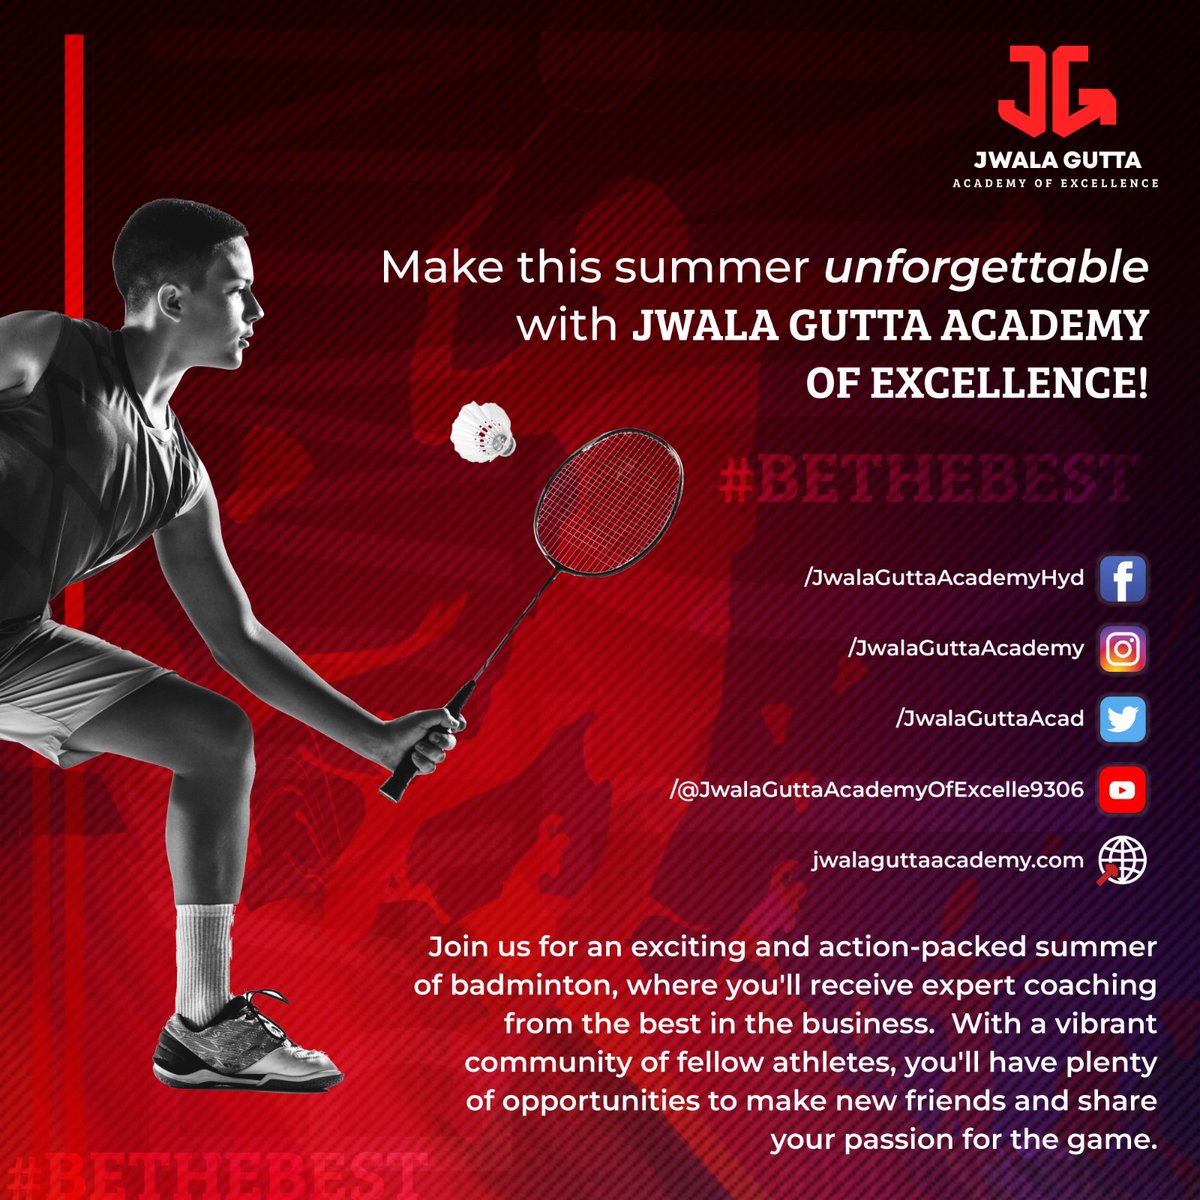 At Jwala Gutta Academy of Excellence, you'll have everything you need to enjoy summer while honing your skills. So why not make this summer one to remember?

Join today!
Contact: +91 8886166211
 
#JwalaGuttaAcademy #SummerFun #BeatTheHeat #BadmintonTraining   #BadmintonLove